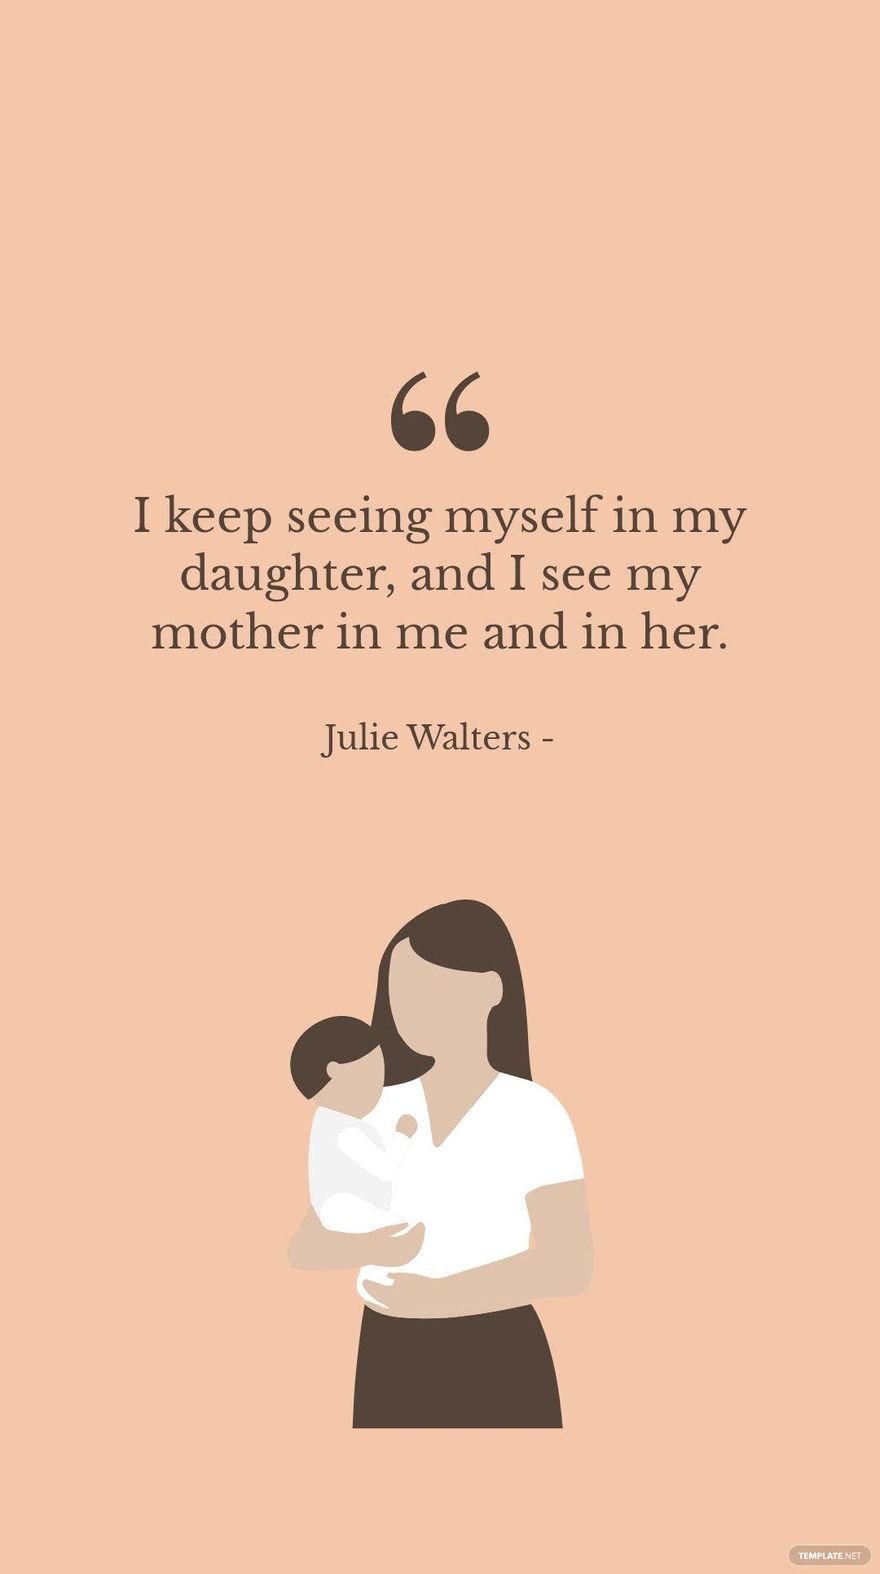 Free Julie Walters - I keep seeing myself in my daughter, and I see my mother in me and in her. in JPG